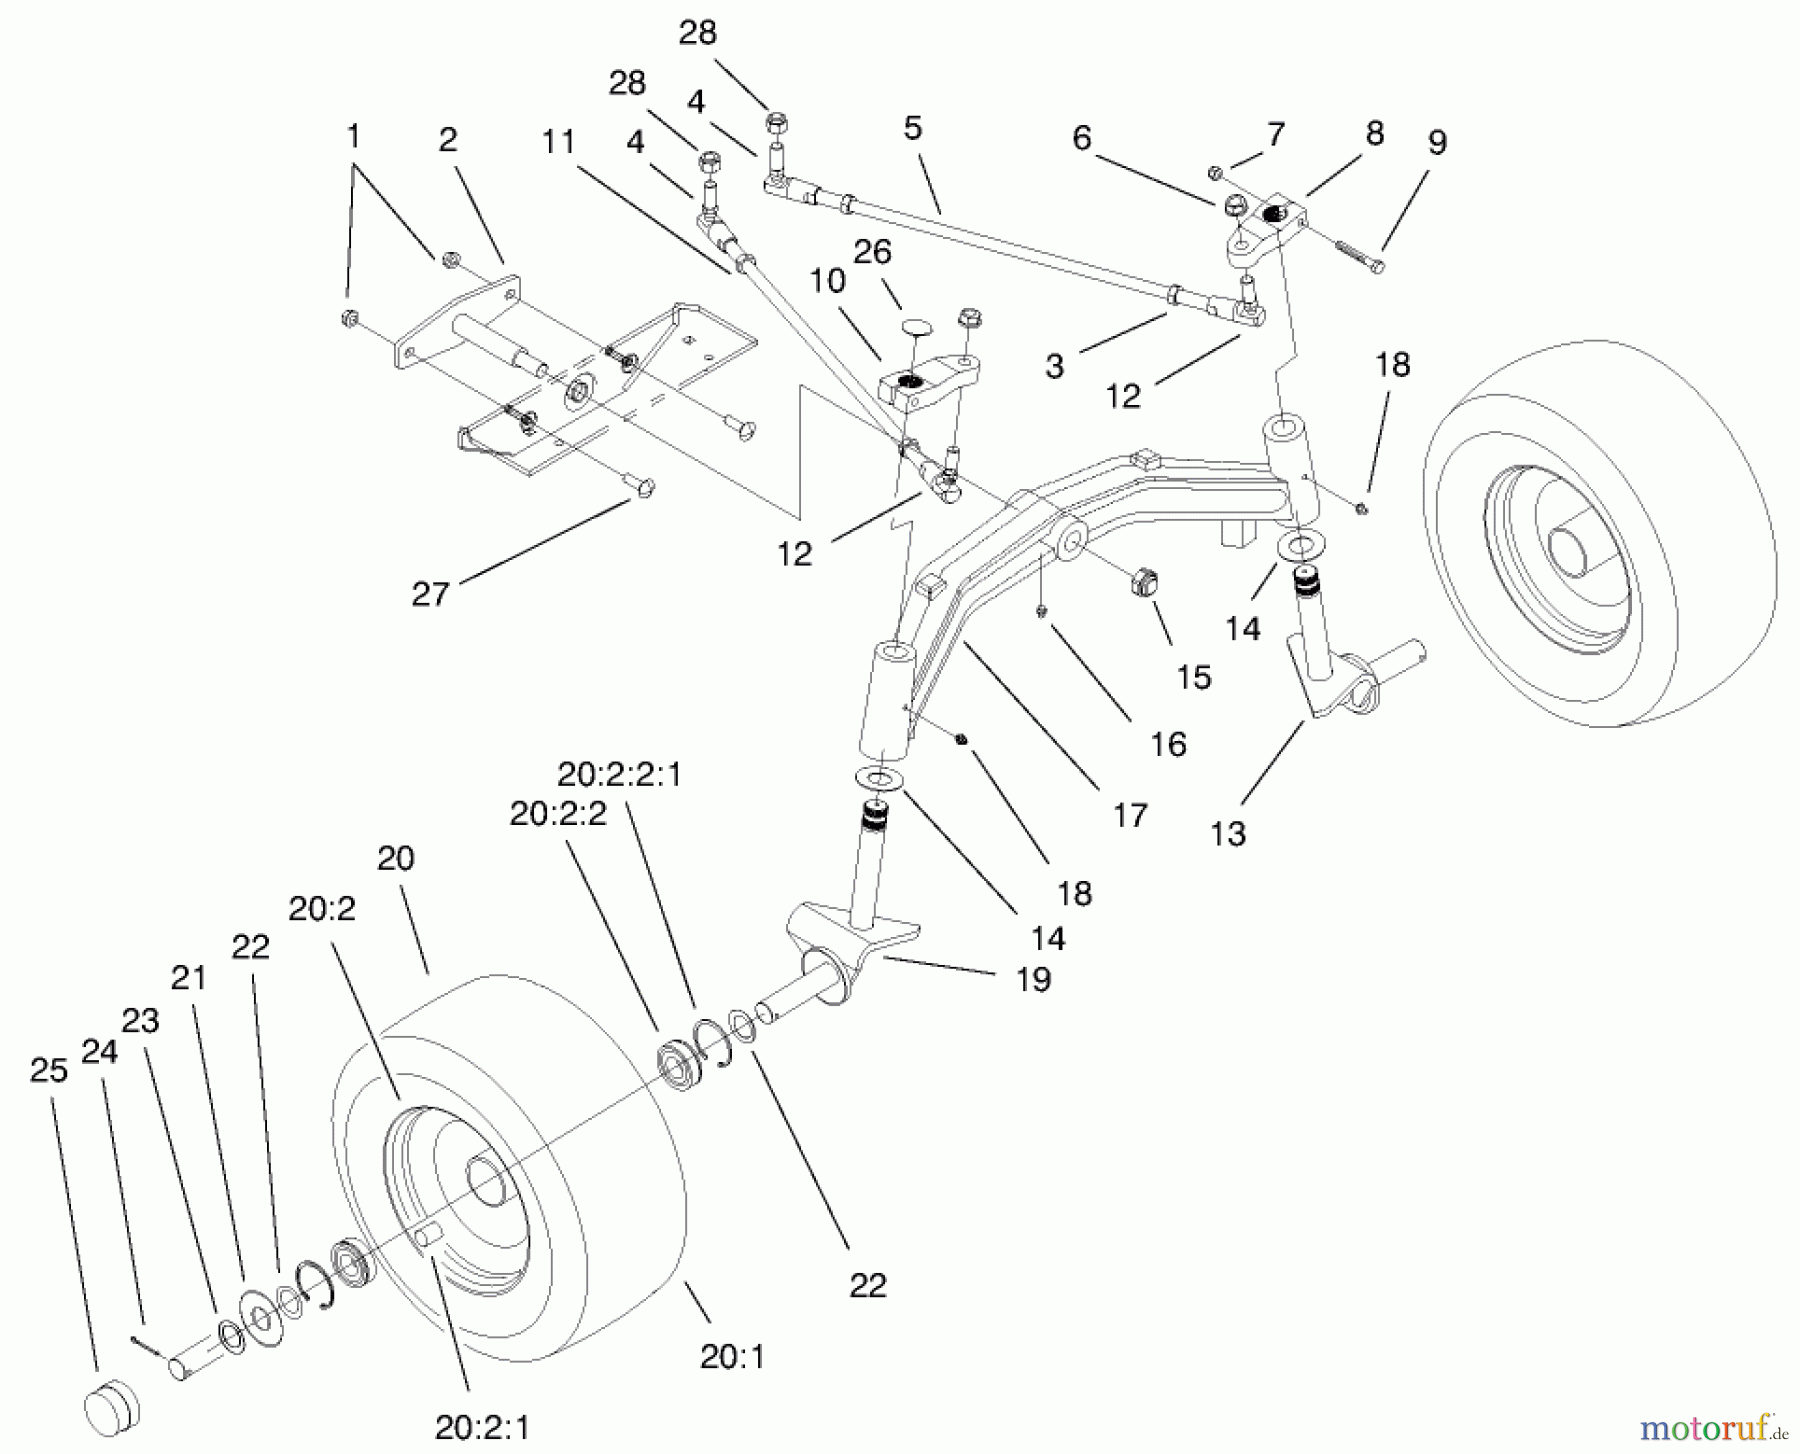  Toro Neu Mowers, Lawn & Garden Tractor Seite 1 73471 (518xi) - Toro 518xi Garden Tractor, 2000 (000000001-000999999) TIE RODS, SPINDLE, & FRONT AXLE ASSEMBLY